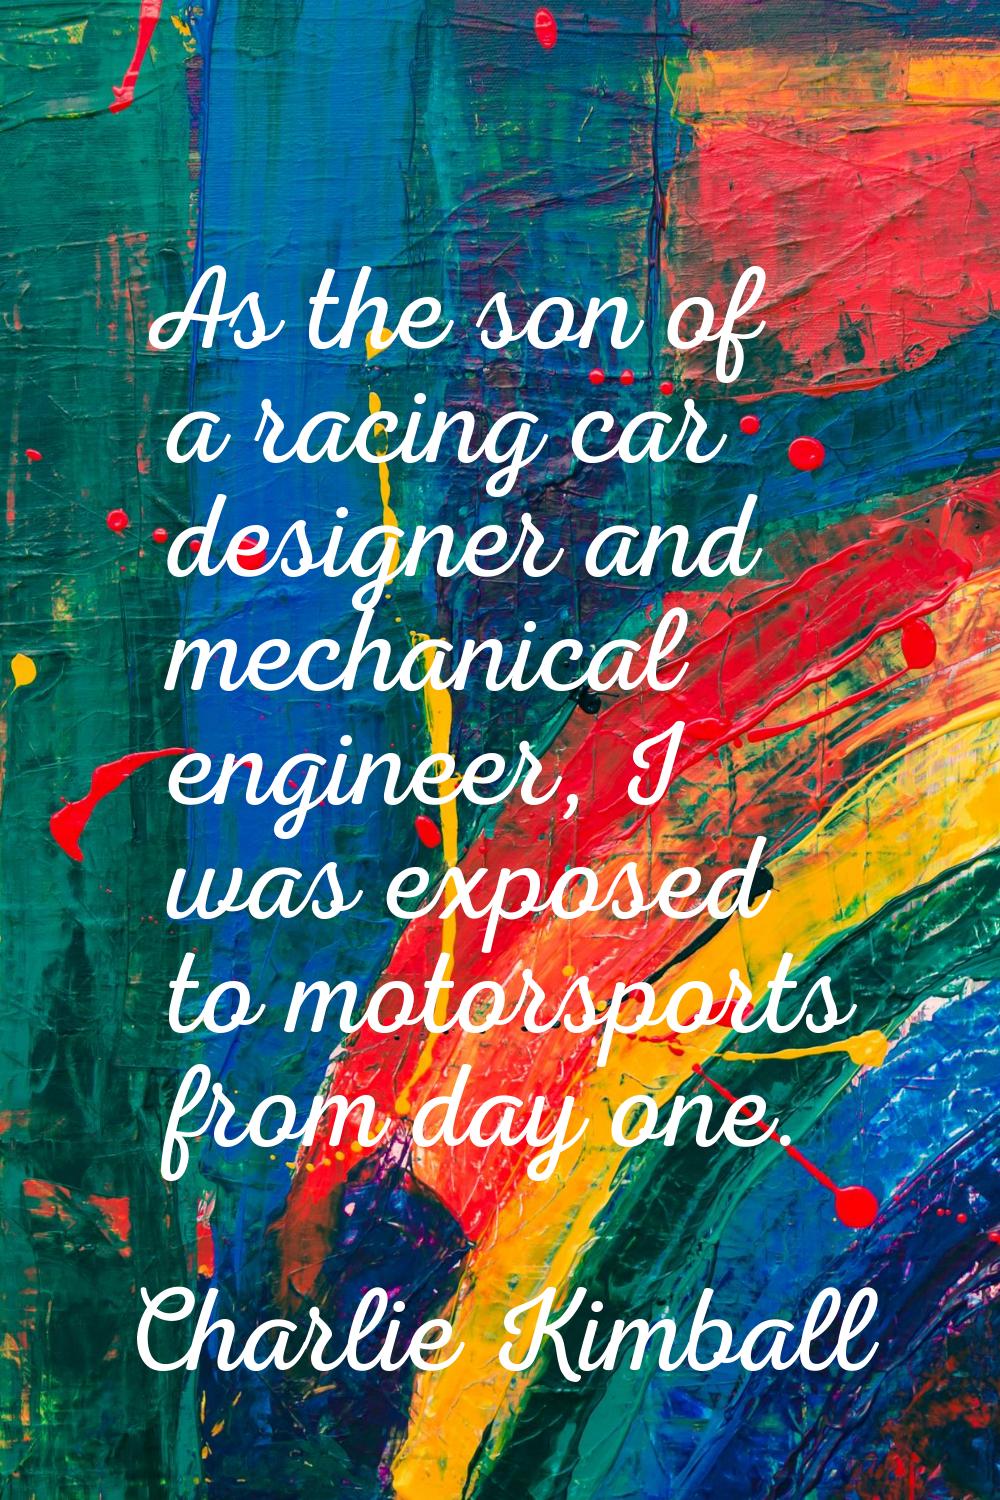 As the son of a racing car designer and mechanical engineer, I was exposed to motorsports from day 